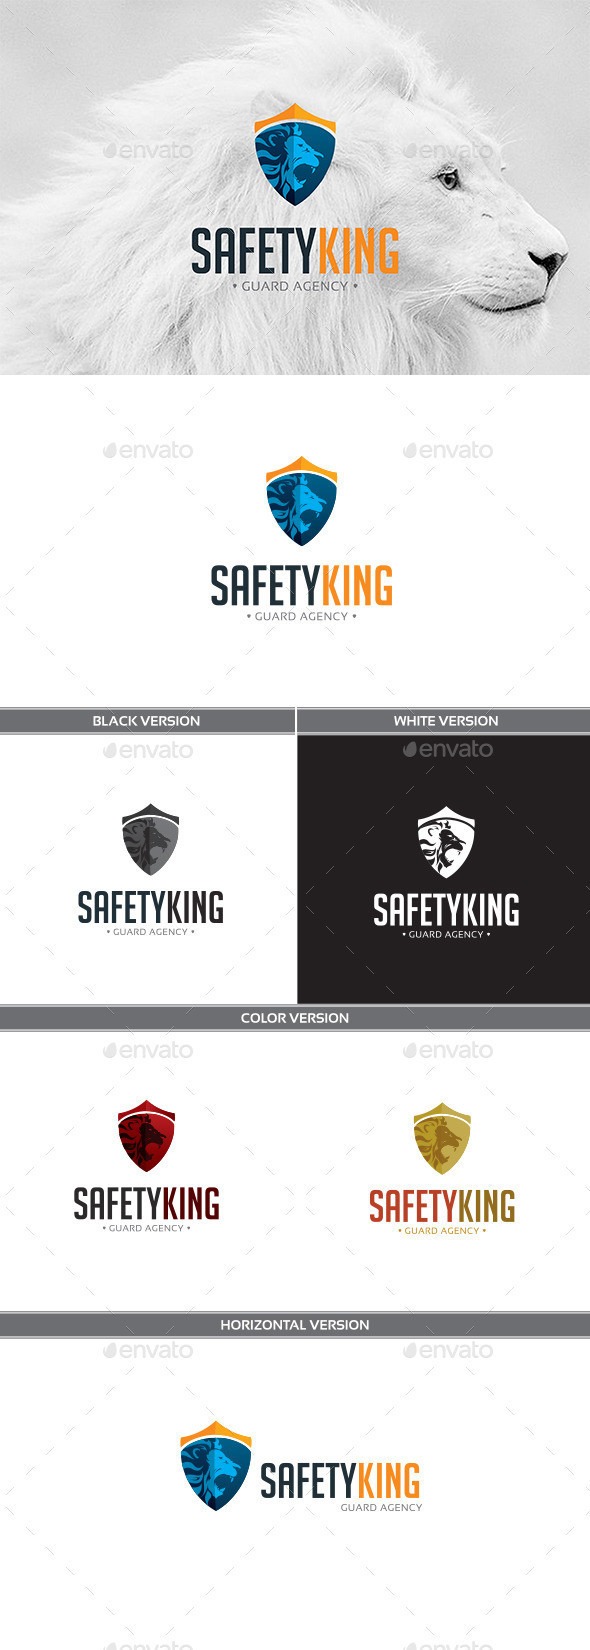 Preview 20safetyking 20logo